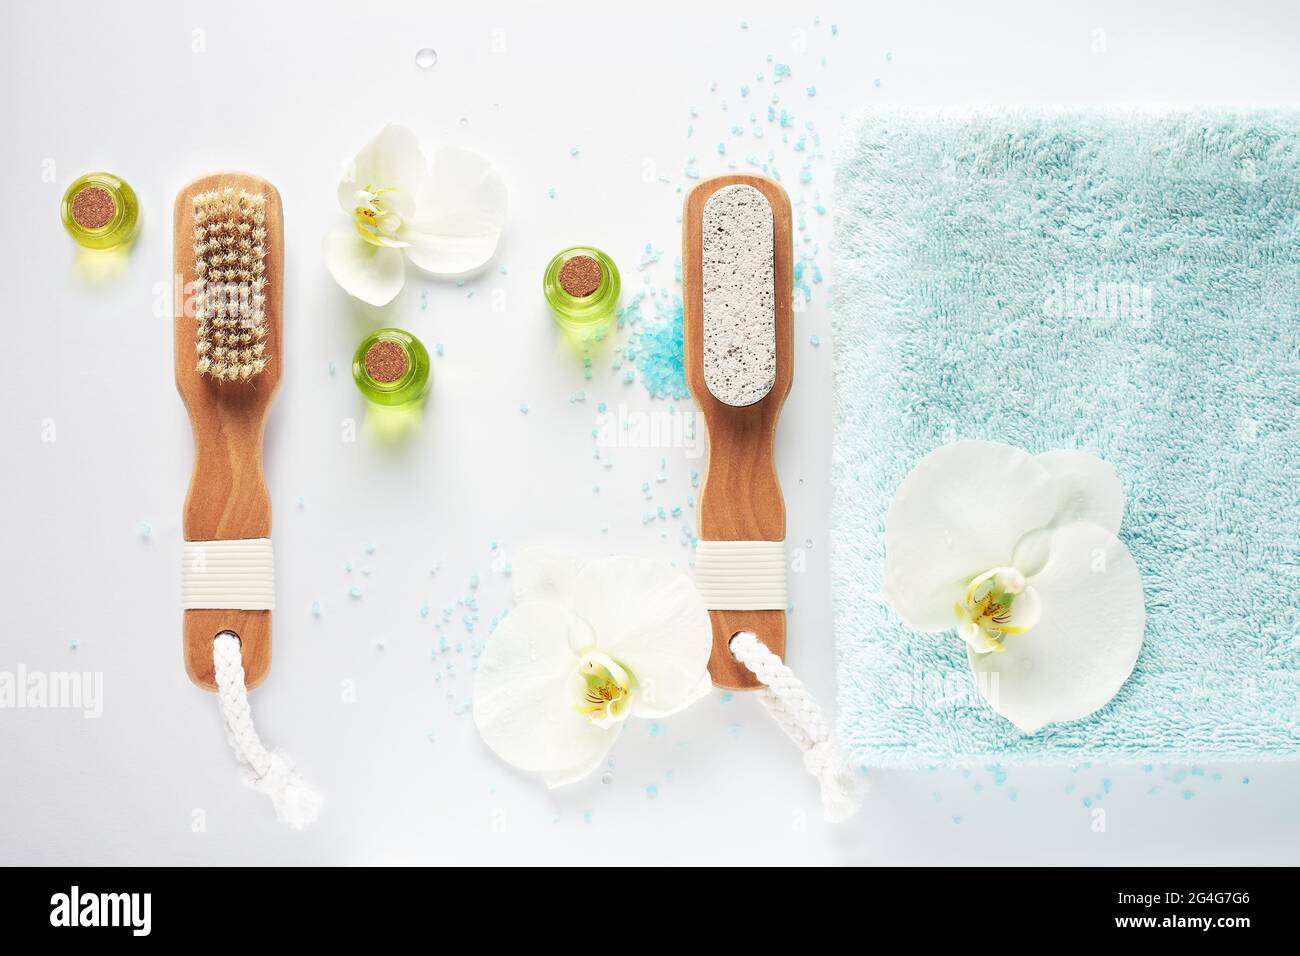 Beauty and skin care products. Spa concept. Stock Photo